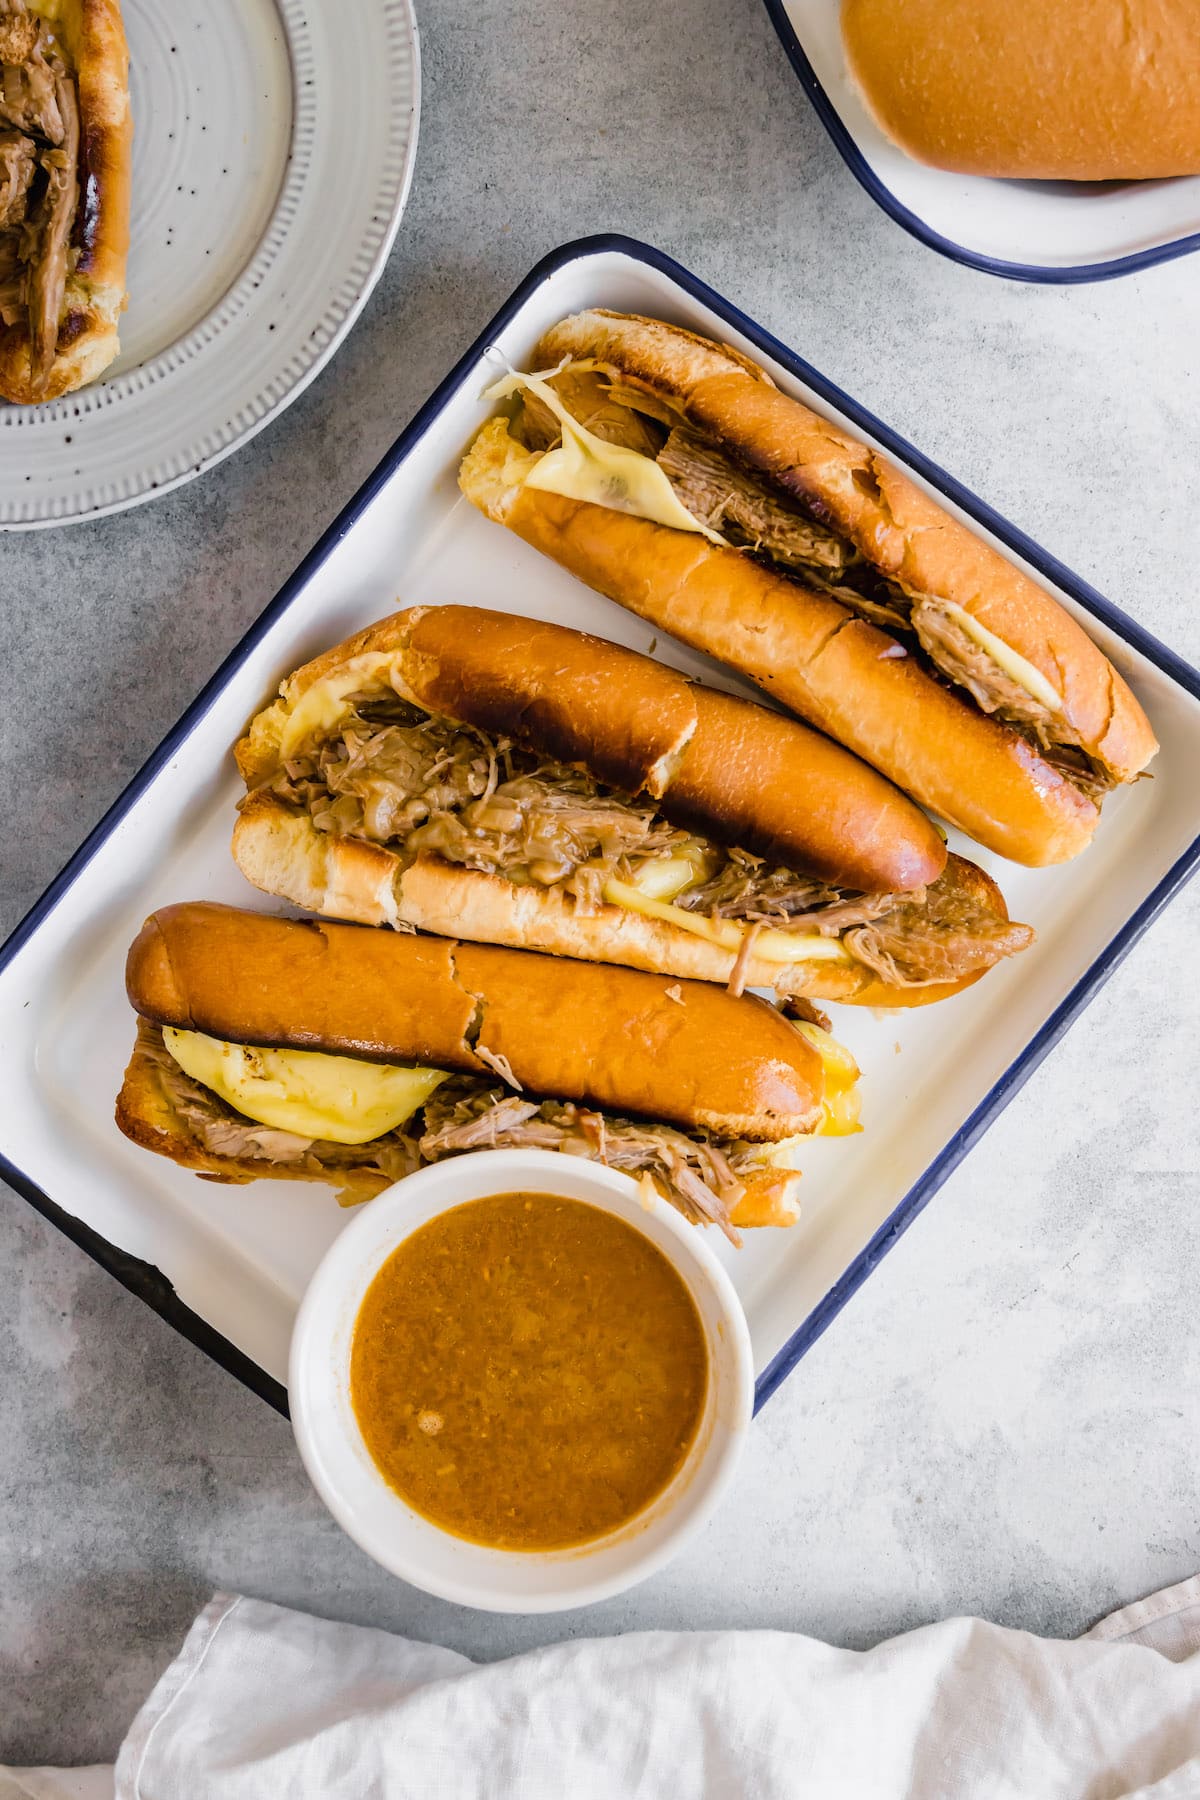 Three French dip sandwiches with au jus.